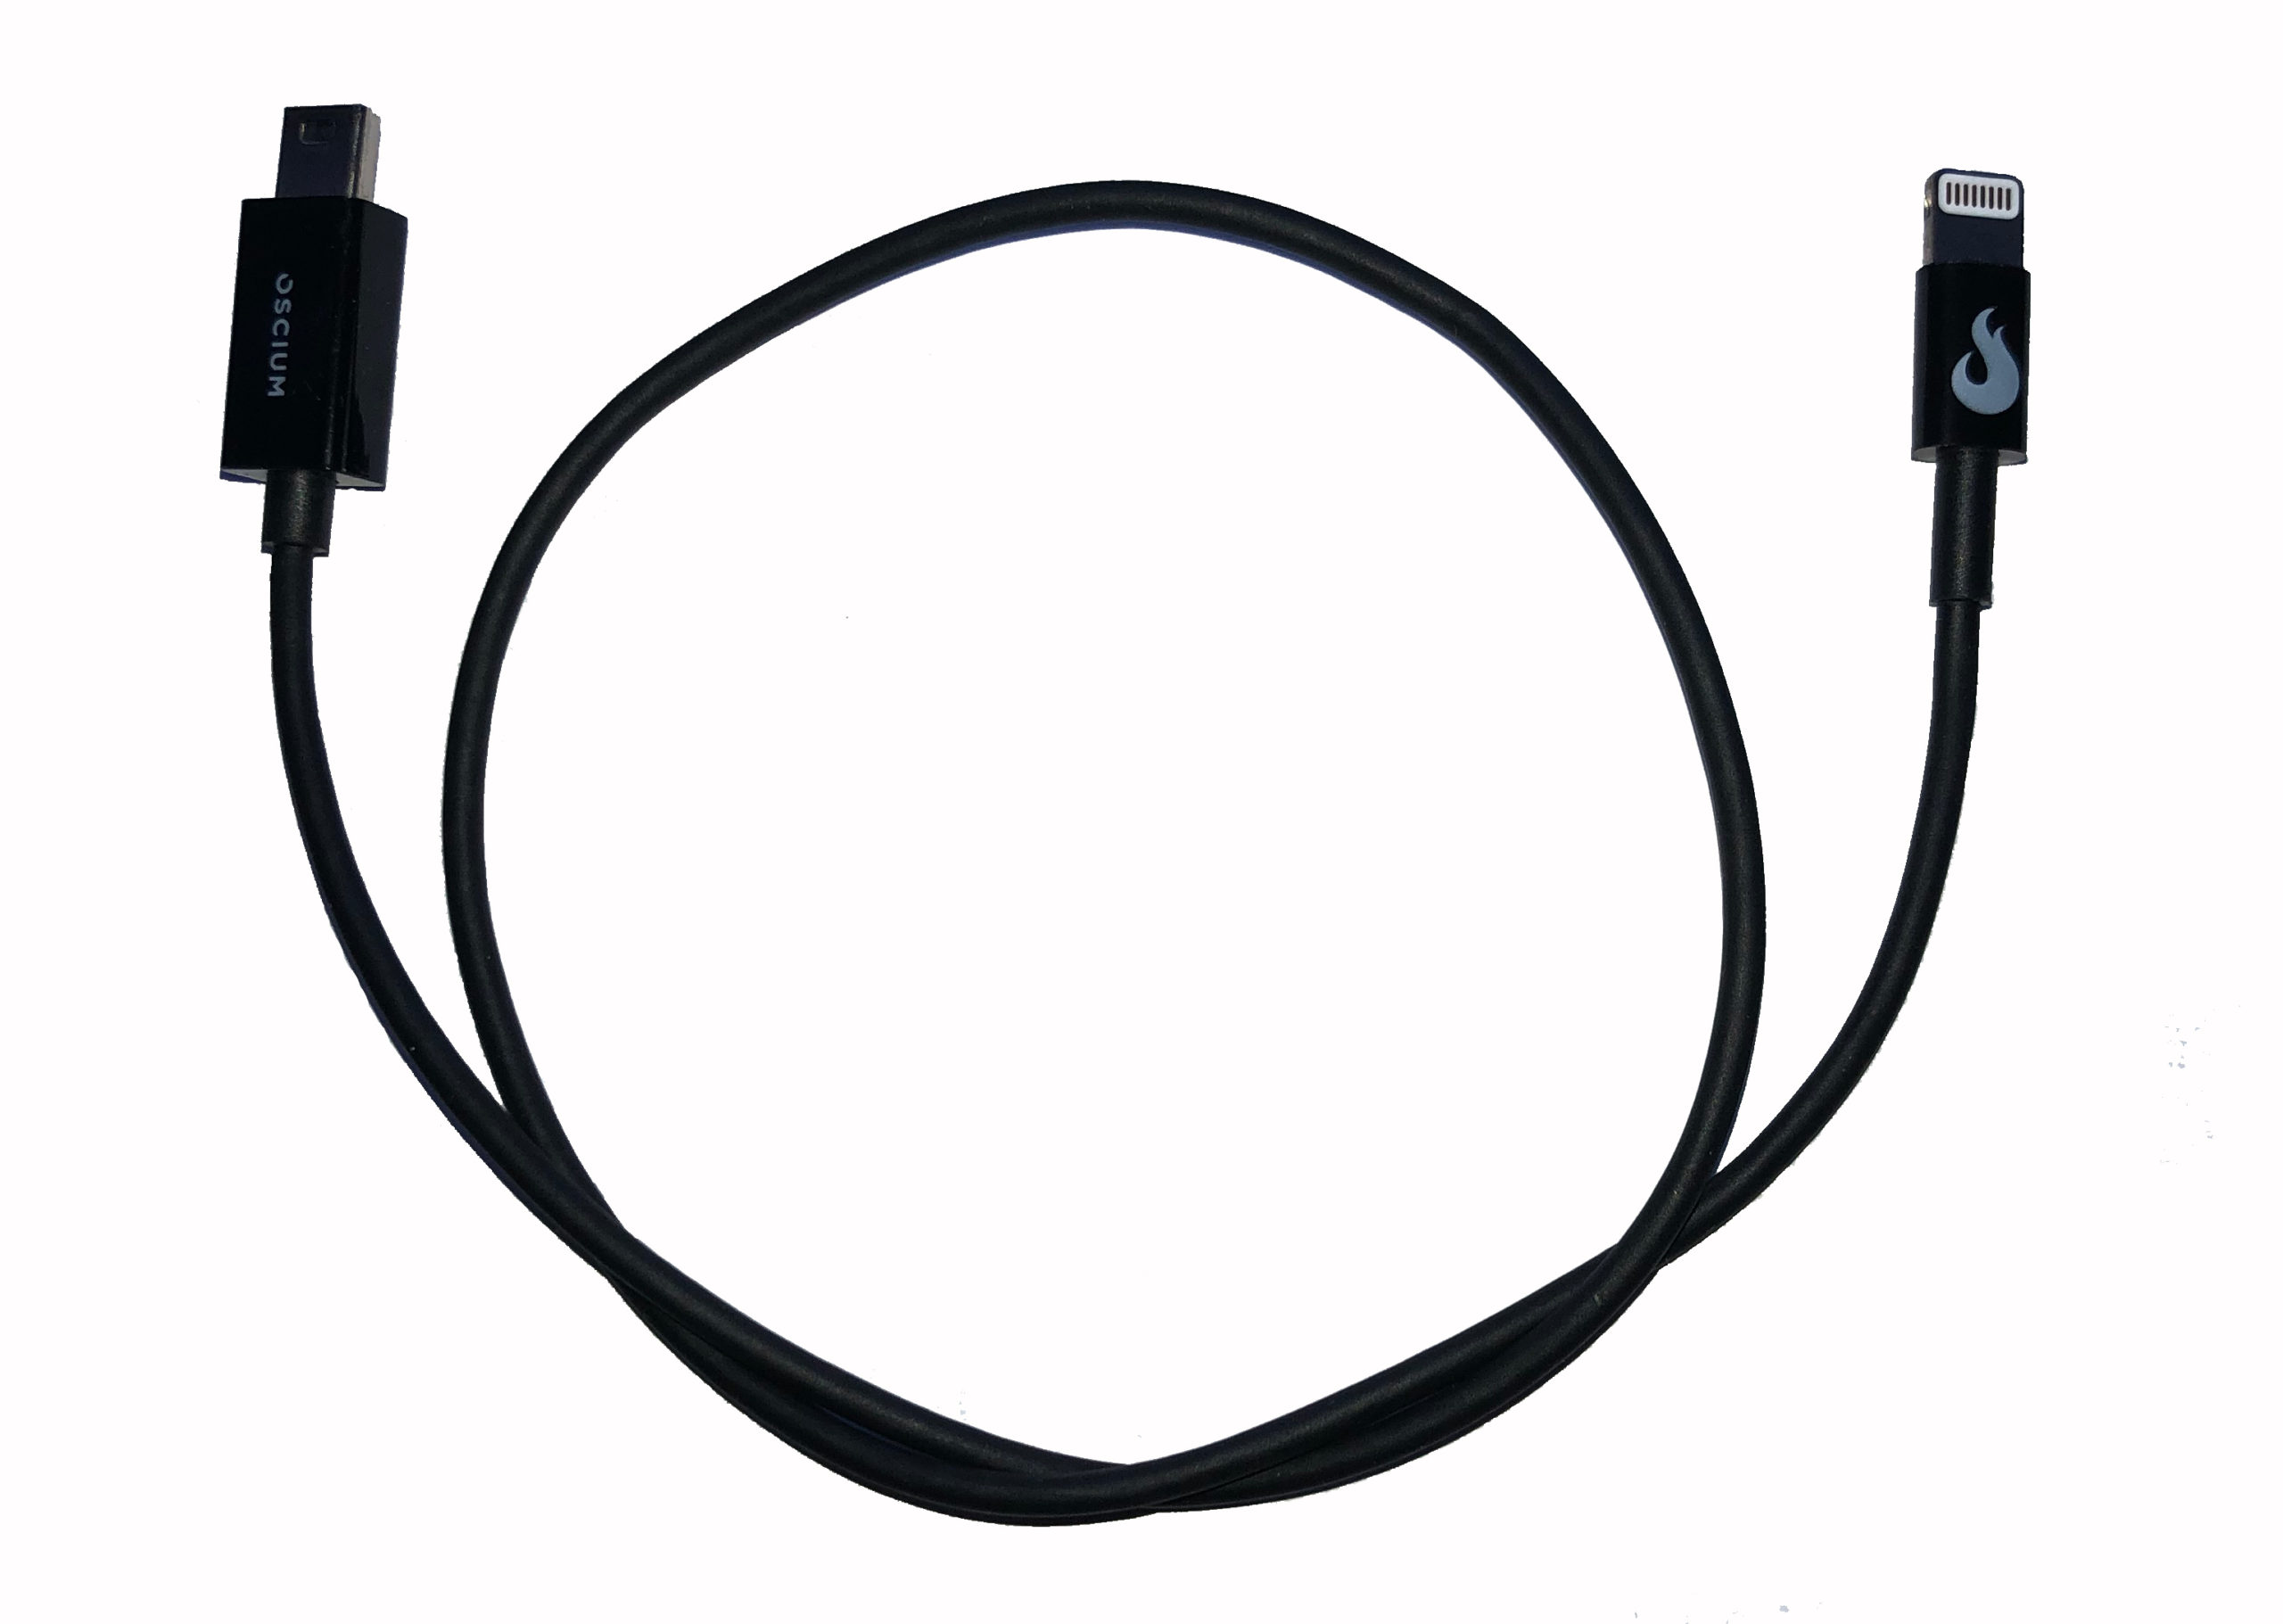 Oscium mini-B to lightning cable, top down view.